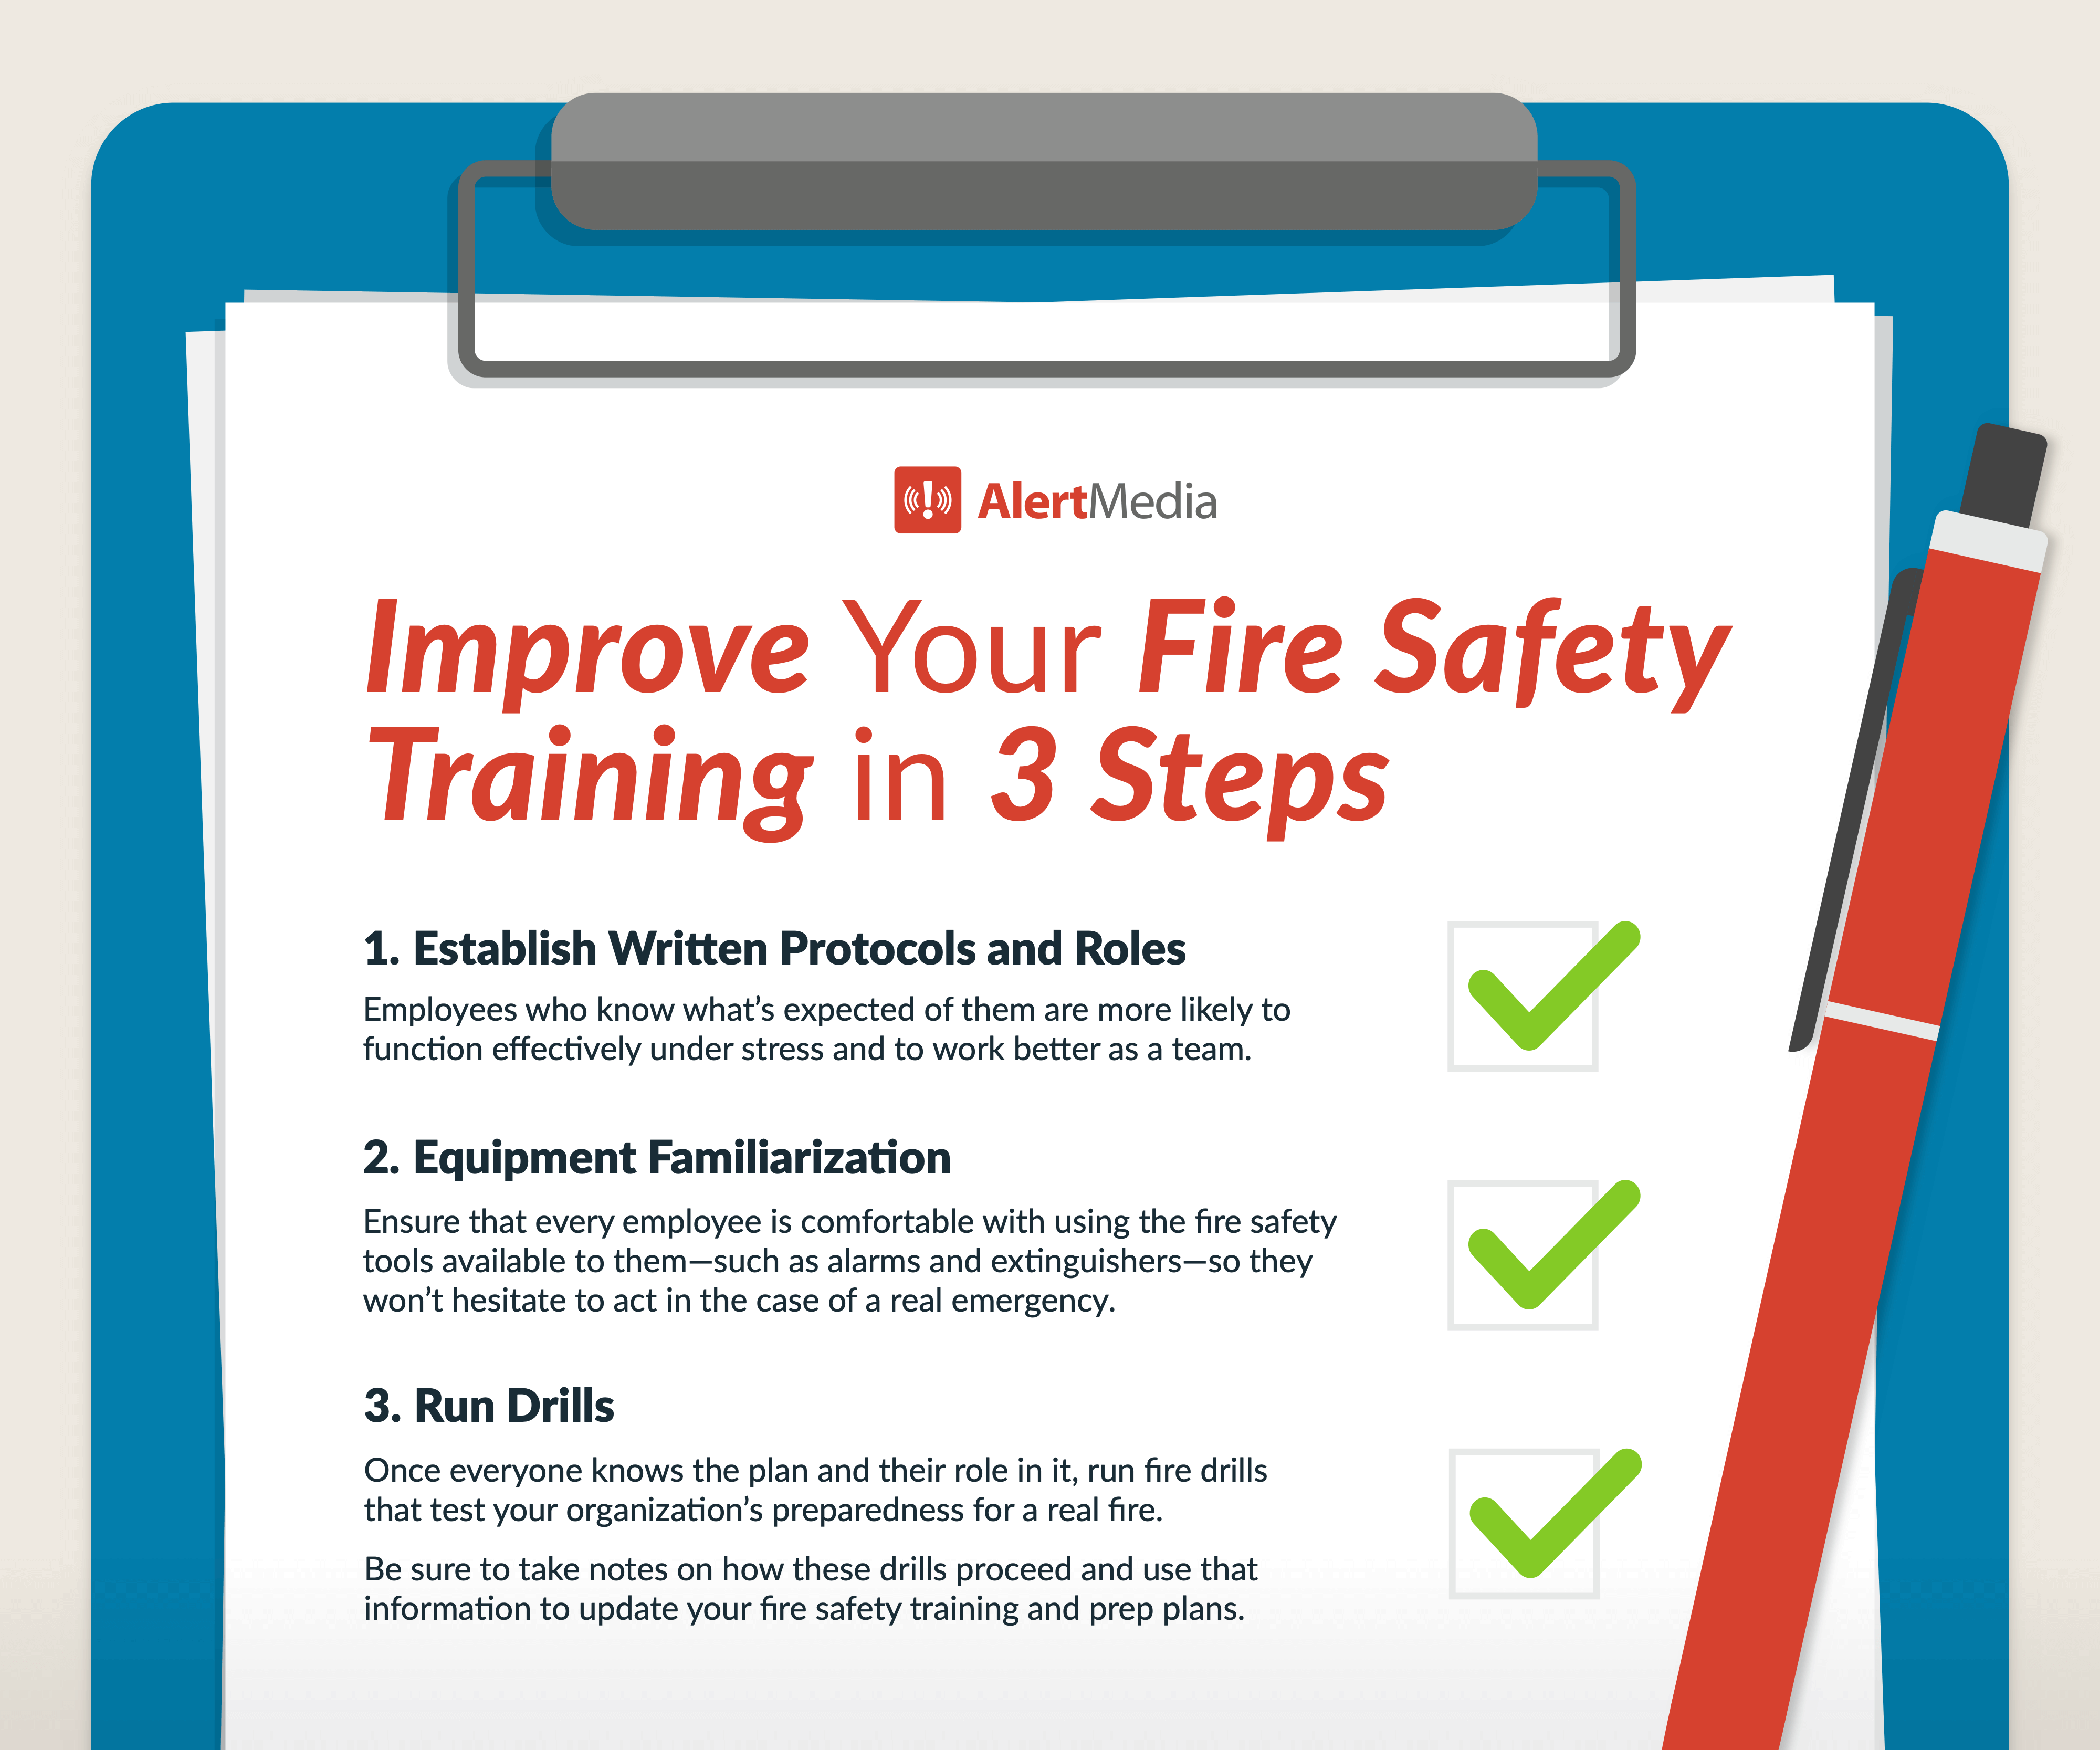 https://www.alertmedia.com/wp-content/uploads/2022/09/AM-Infographic-FirePage-Improve-Fire-Safety-Training.png